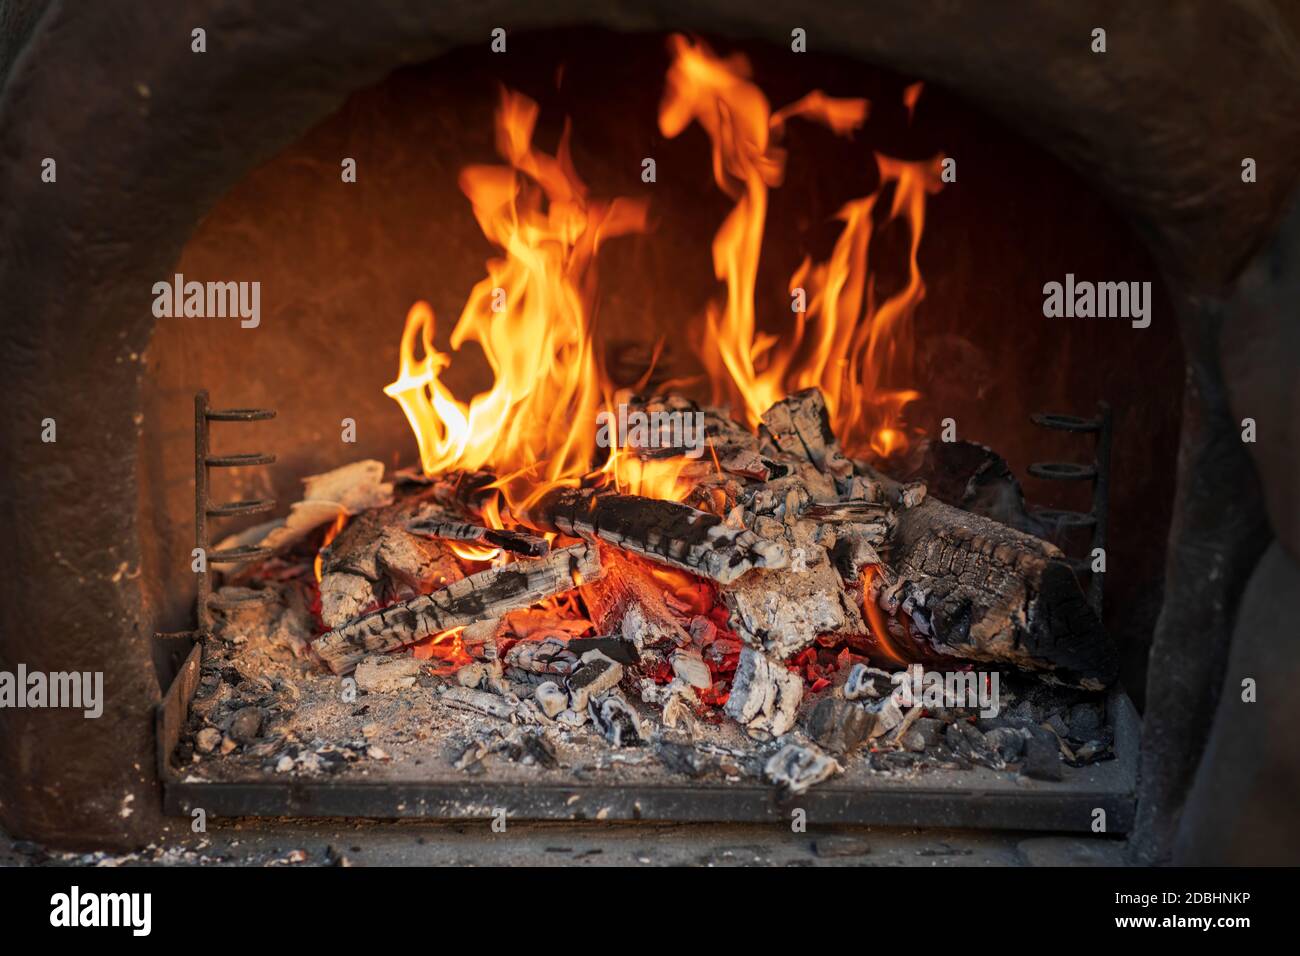 Wood burning in empty barbecue grill Stock Photo